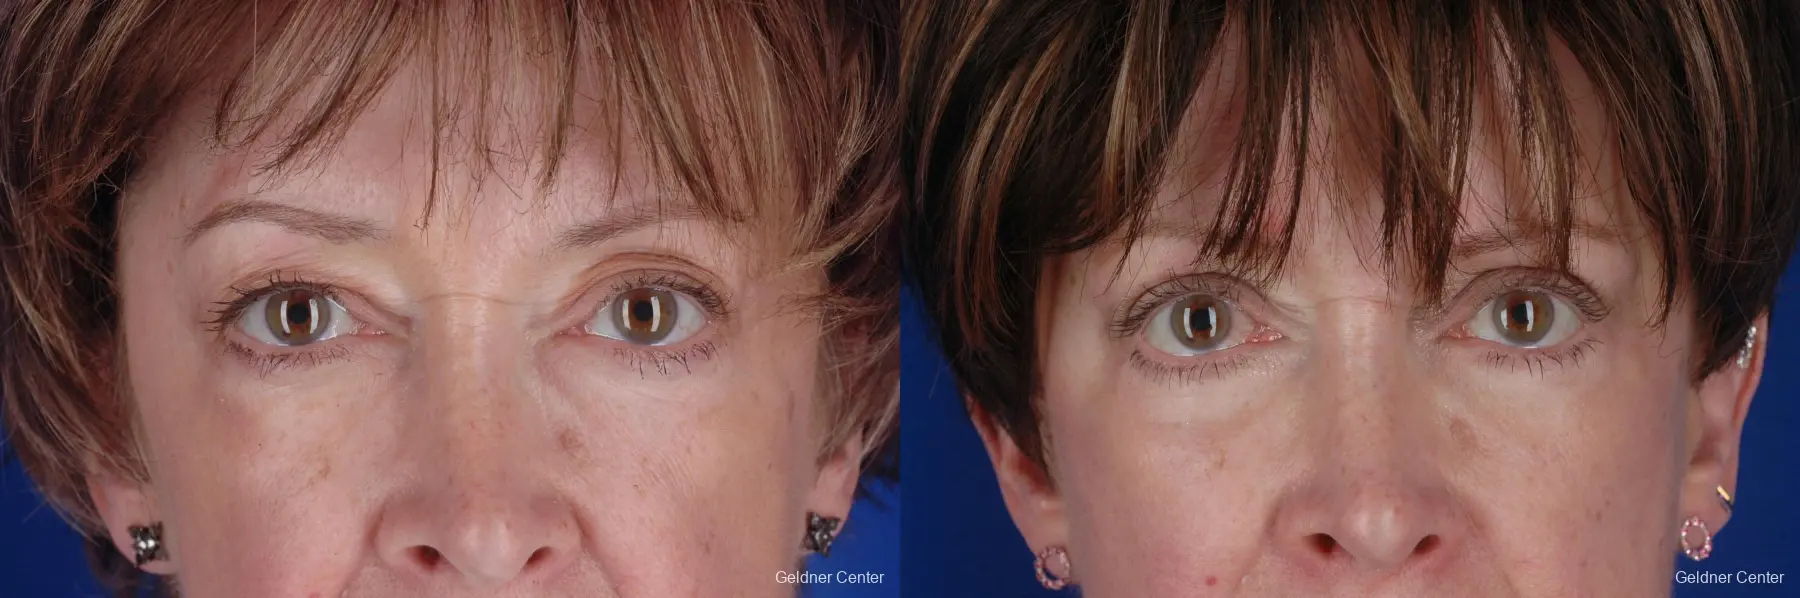 Eyelid Lift Streeterville, Chicago 2396 - Before and After 1